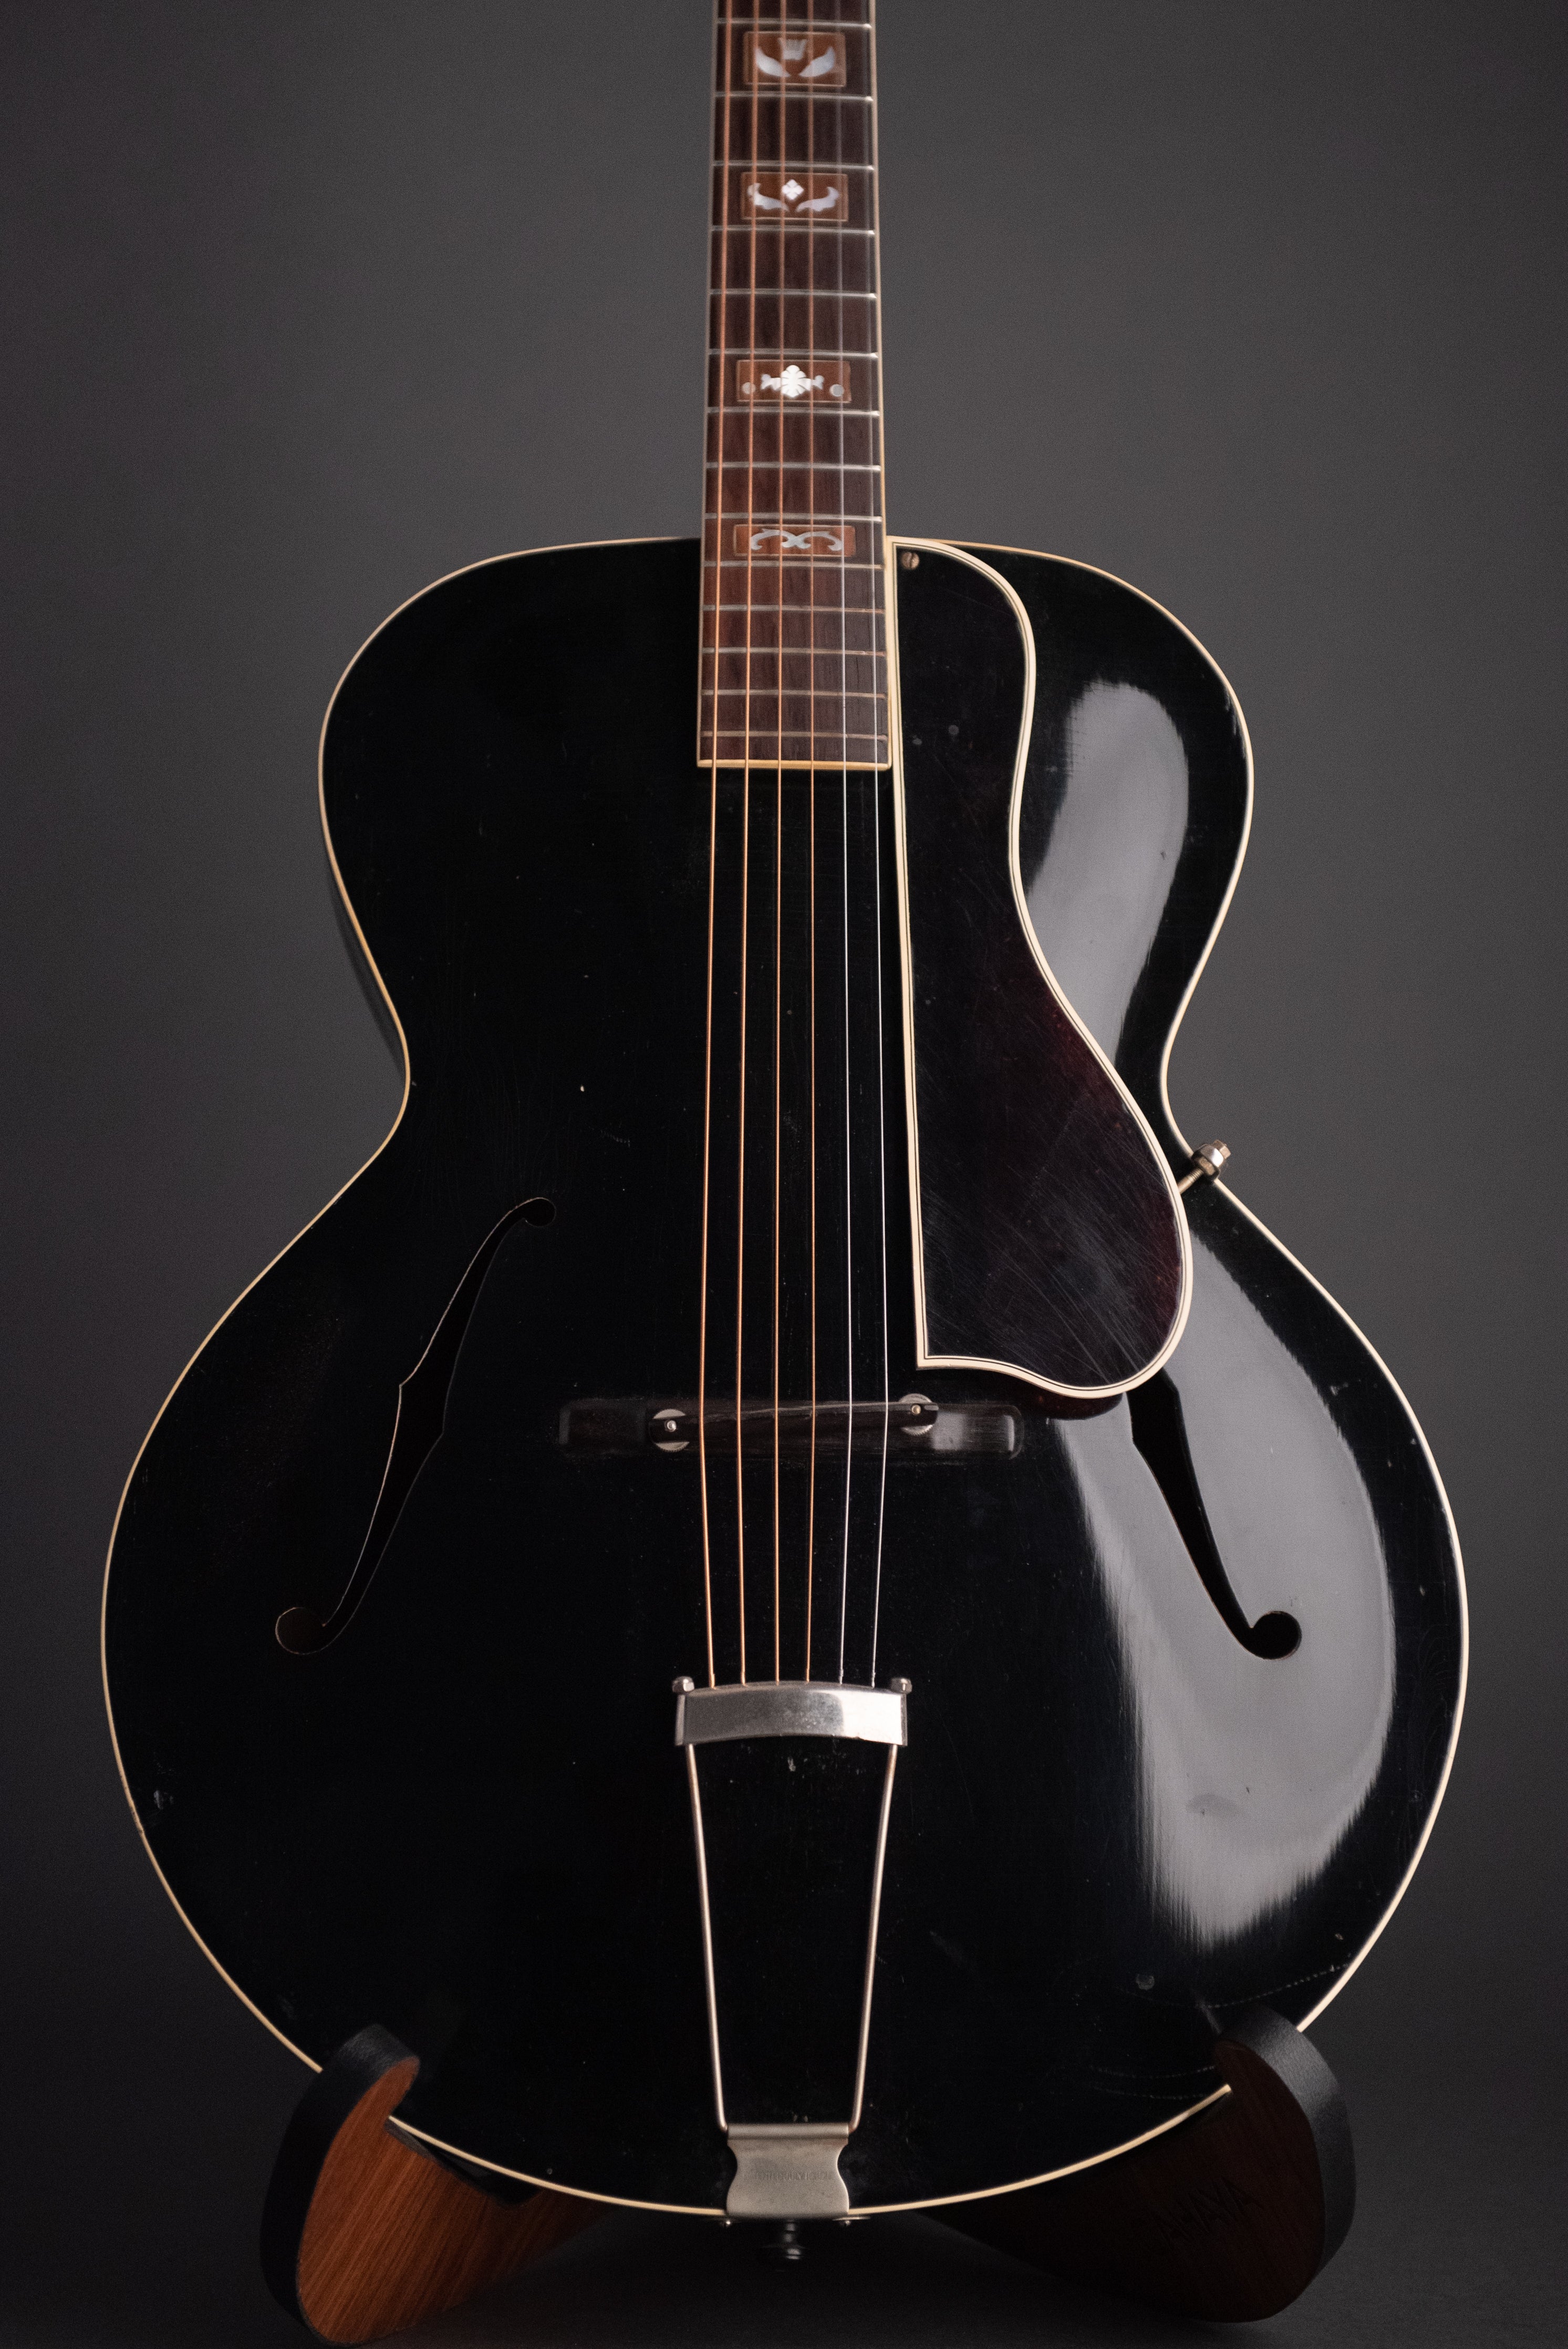 1933 Gibson L-10 Archtop Acoustic Guitar